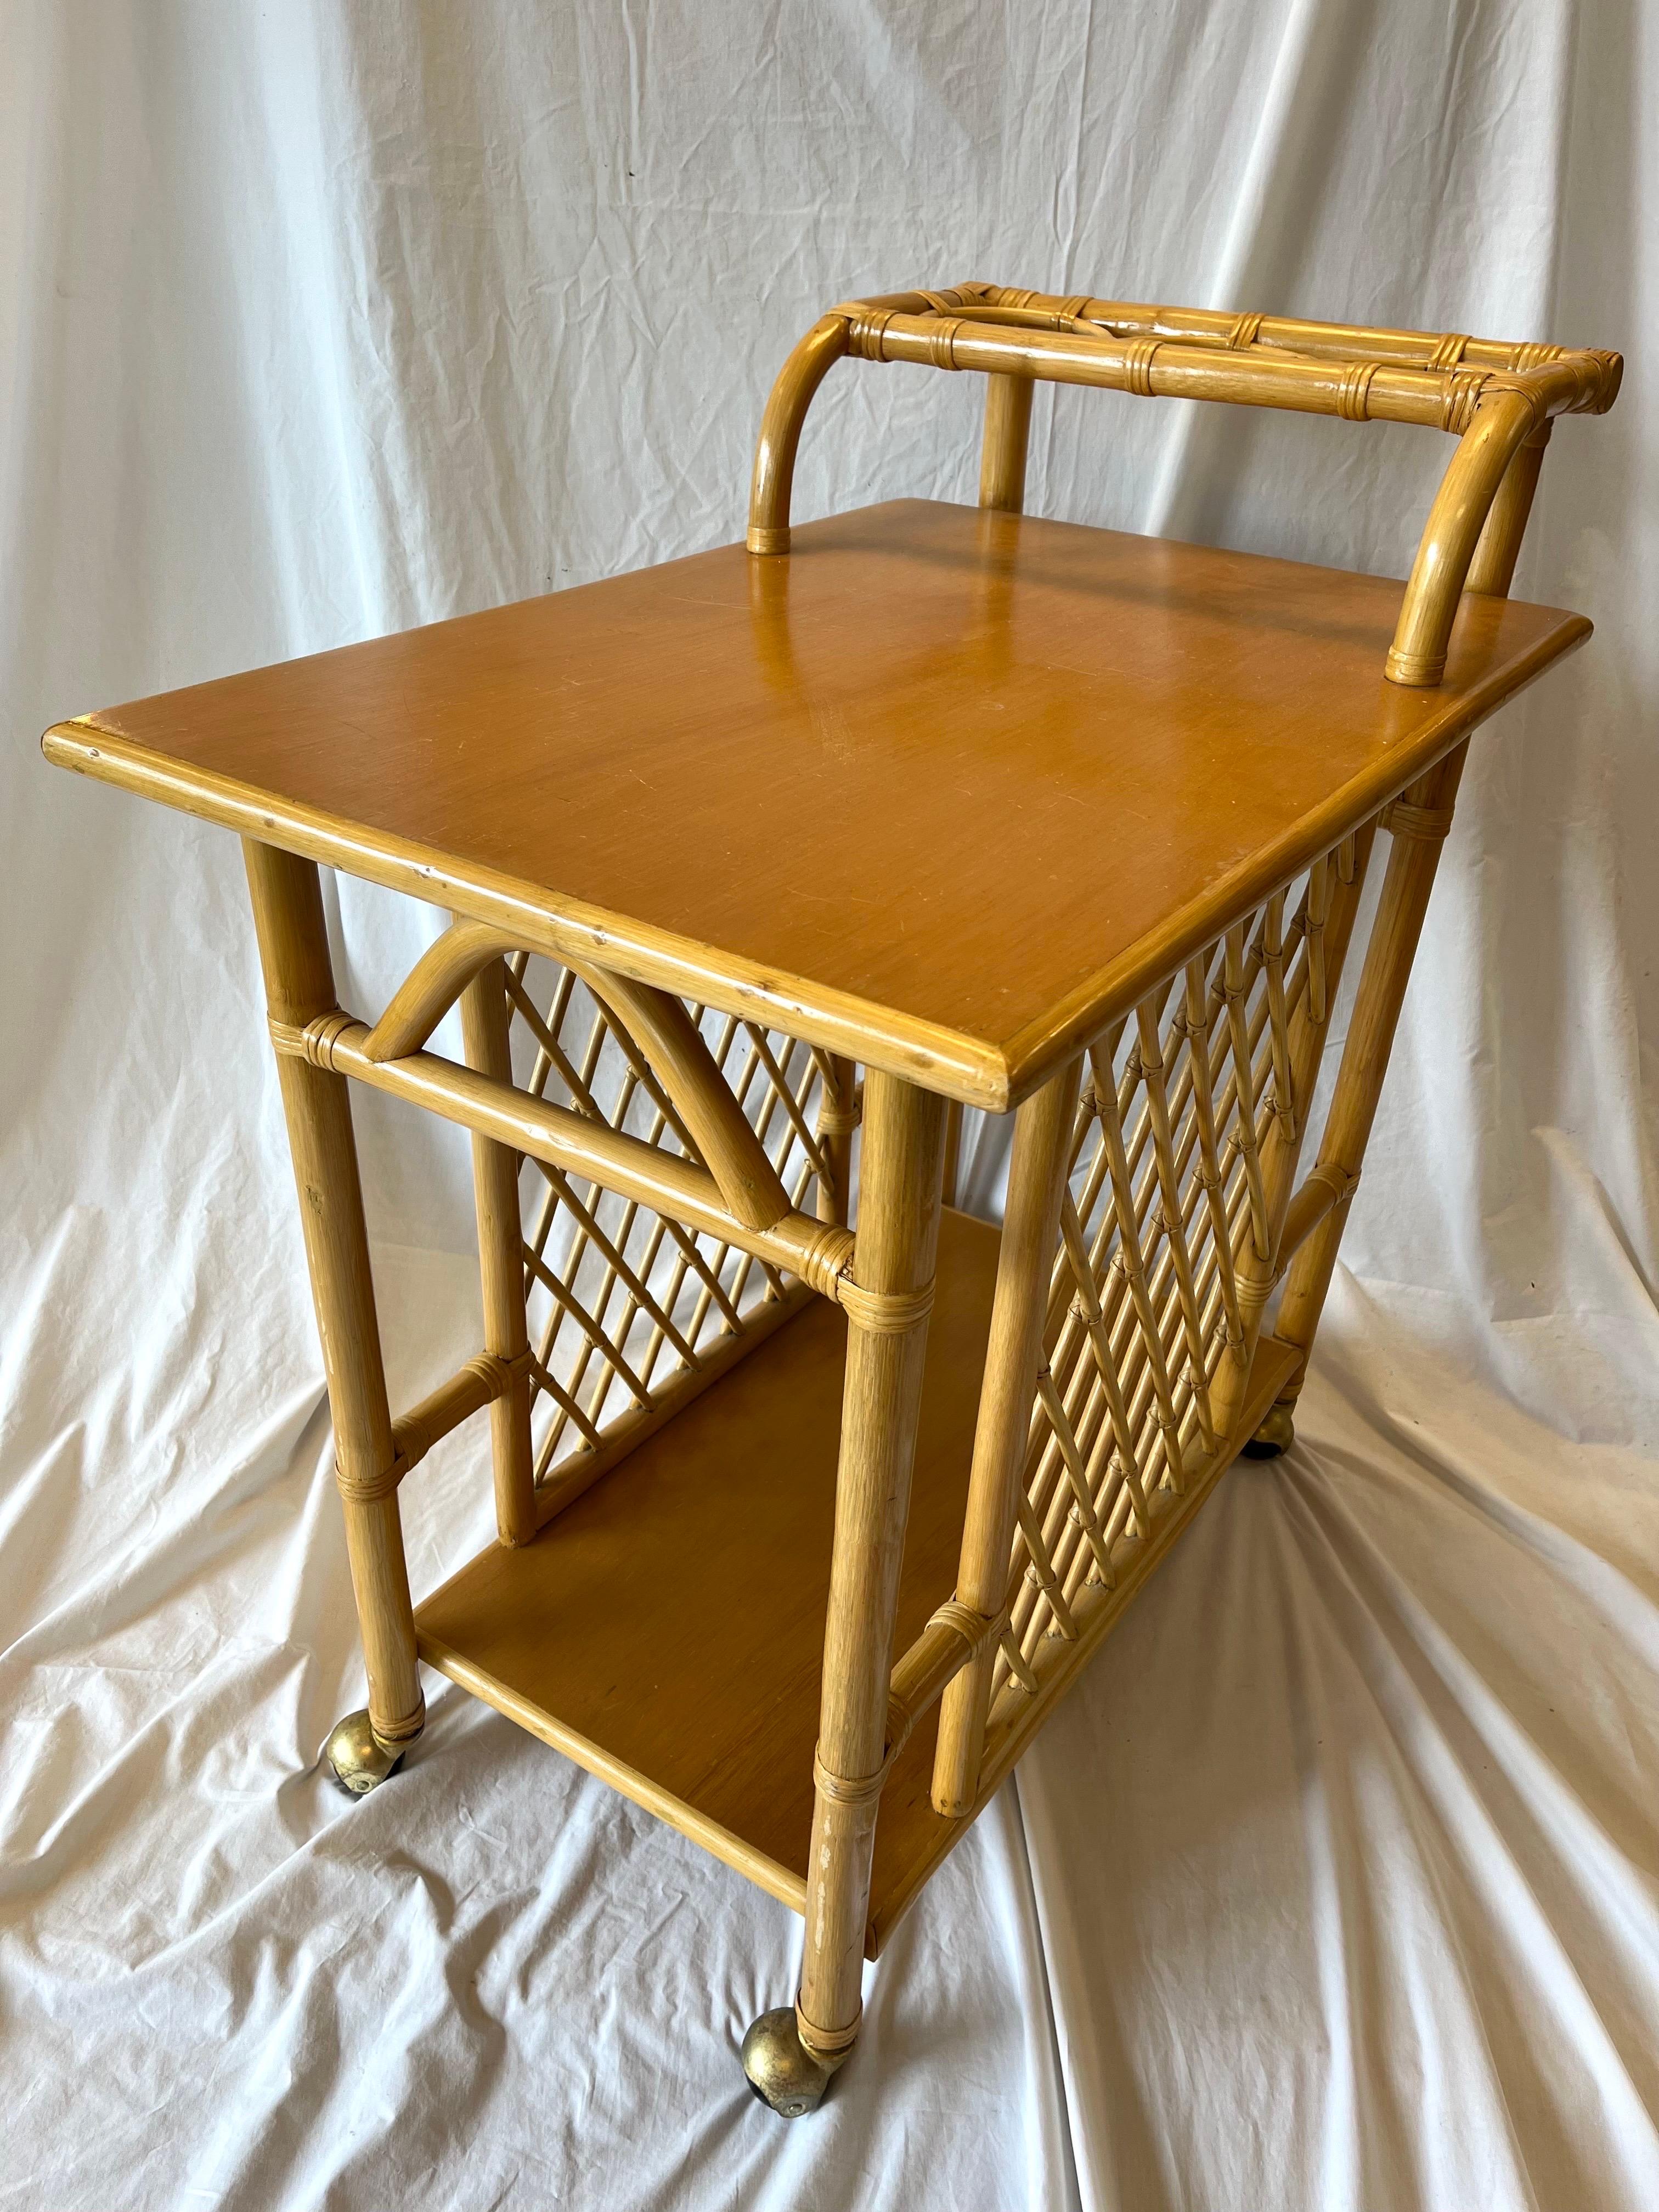 A vintage, mid 20th century bamboo, two tier bar cart or trolley with a cross hatched or trellis design on either side as well as a handle that incorporates storage for three bottle os your favorite beverage. The top shelf (no pun intended) is well